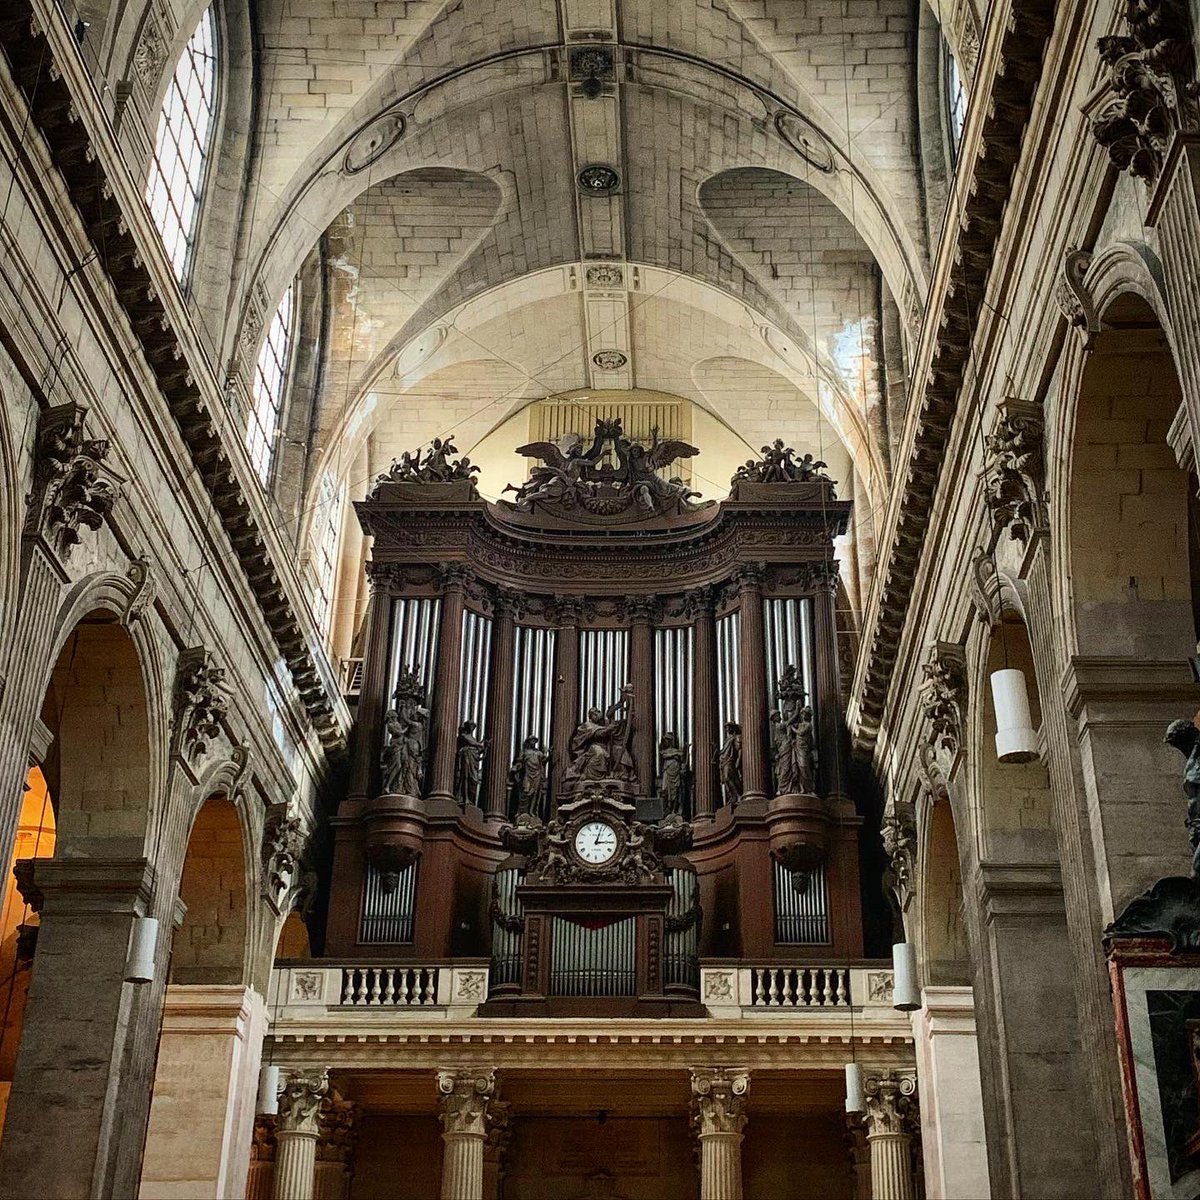 An absolute privilege to take three @KSWMusicSchool students to observe the magnificent Sophie-Véronique Cauchefer playing for tonight’s evening mass at Saint-Sulpice. The heritage of that organ, coupled with the continued magnificence of performance, is something very special.